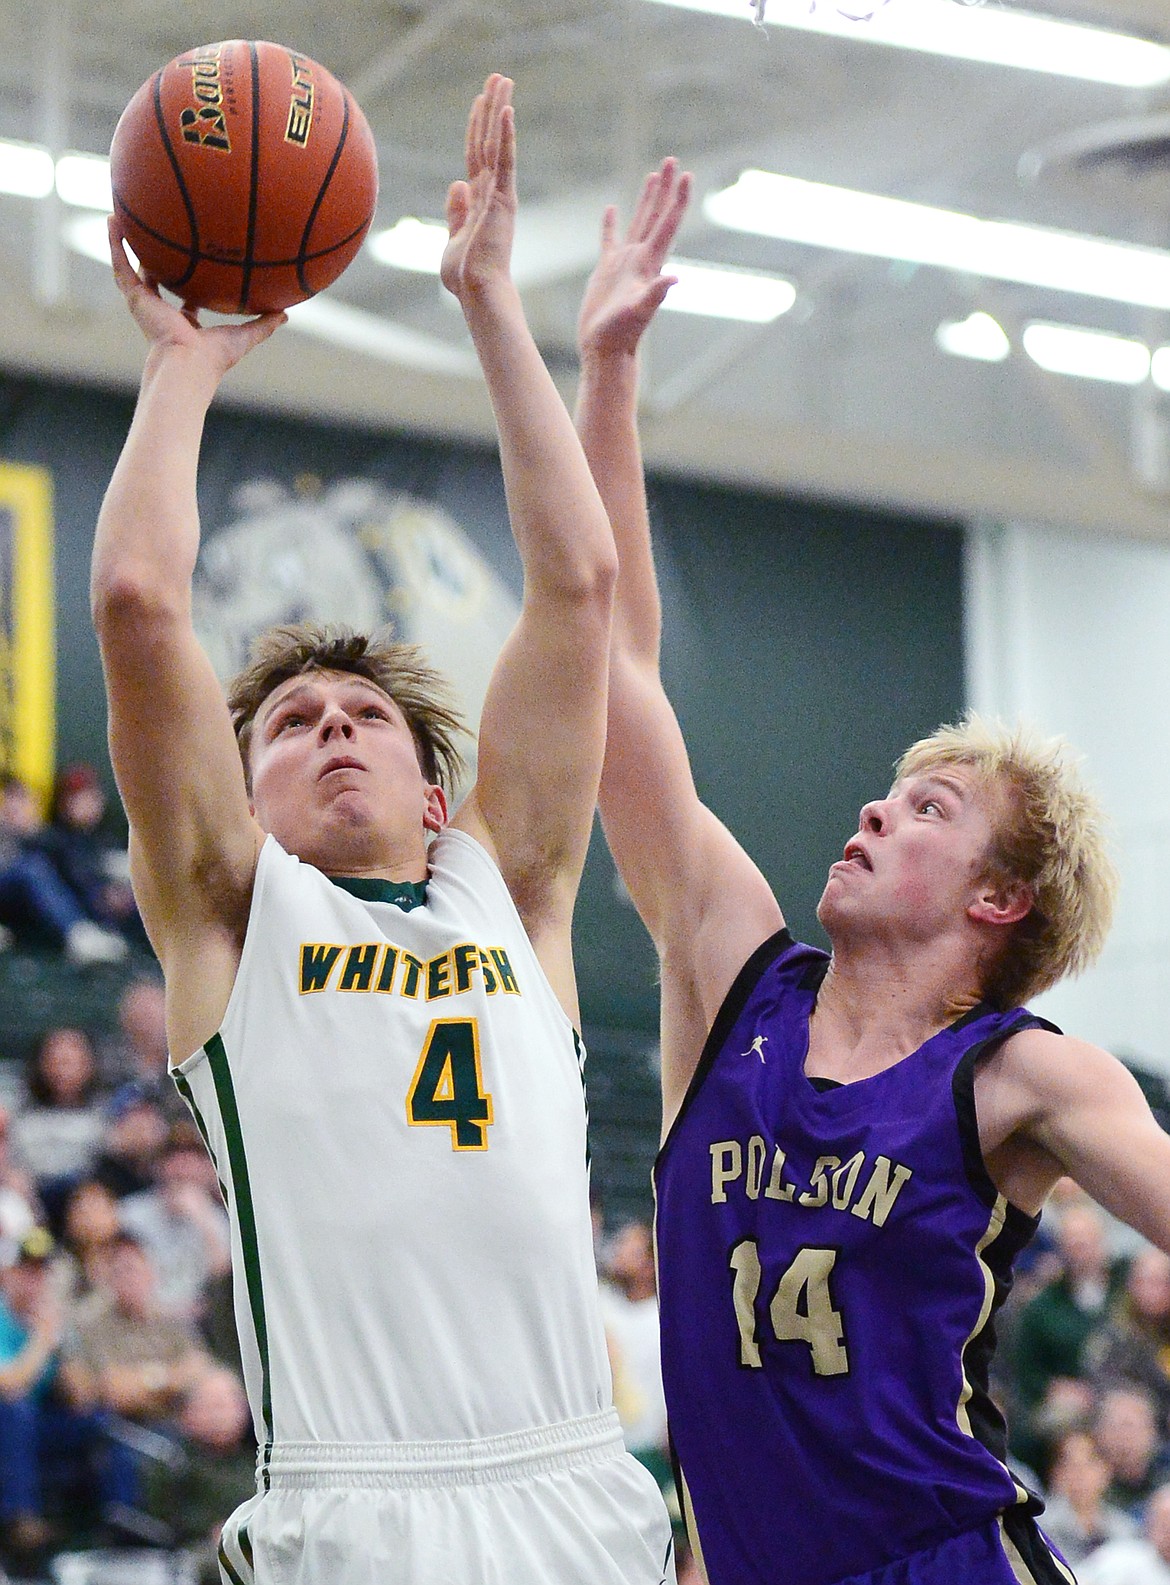 Whitefish's Jack Schwaiger (4) heads to the basket with Polson's Trevor Schultz (14) defending at Whitefish High School on Friday. (Casey Kreider/Daily Inter Lake)